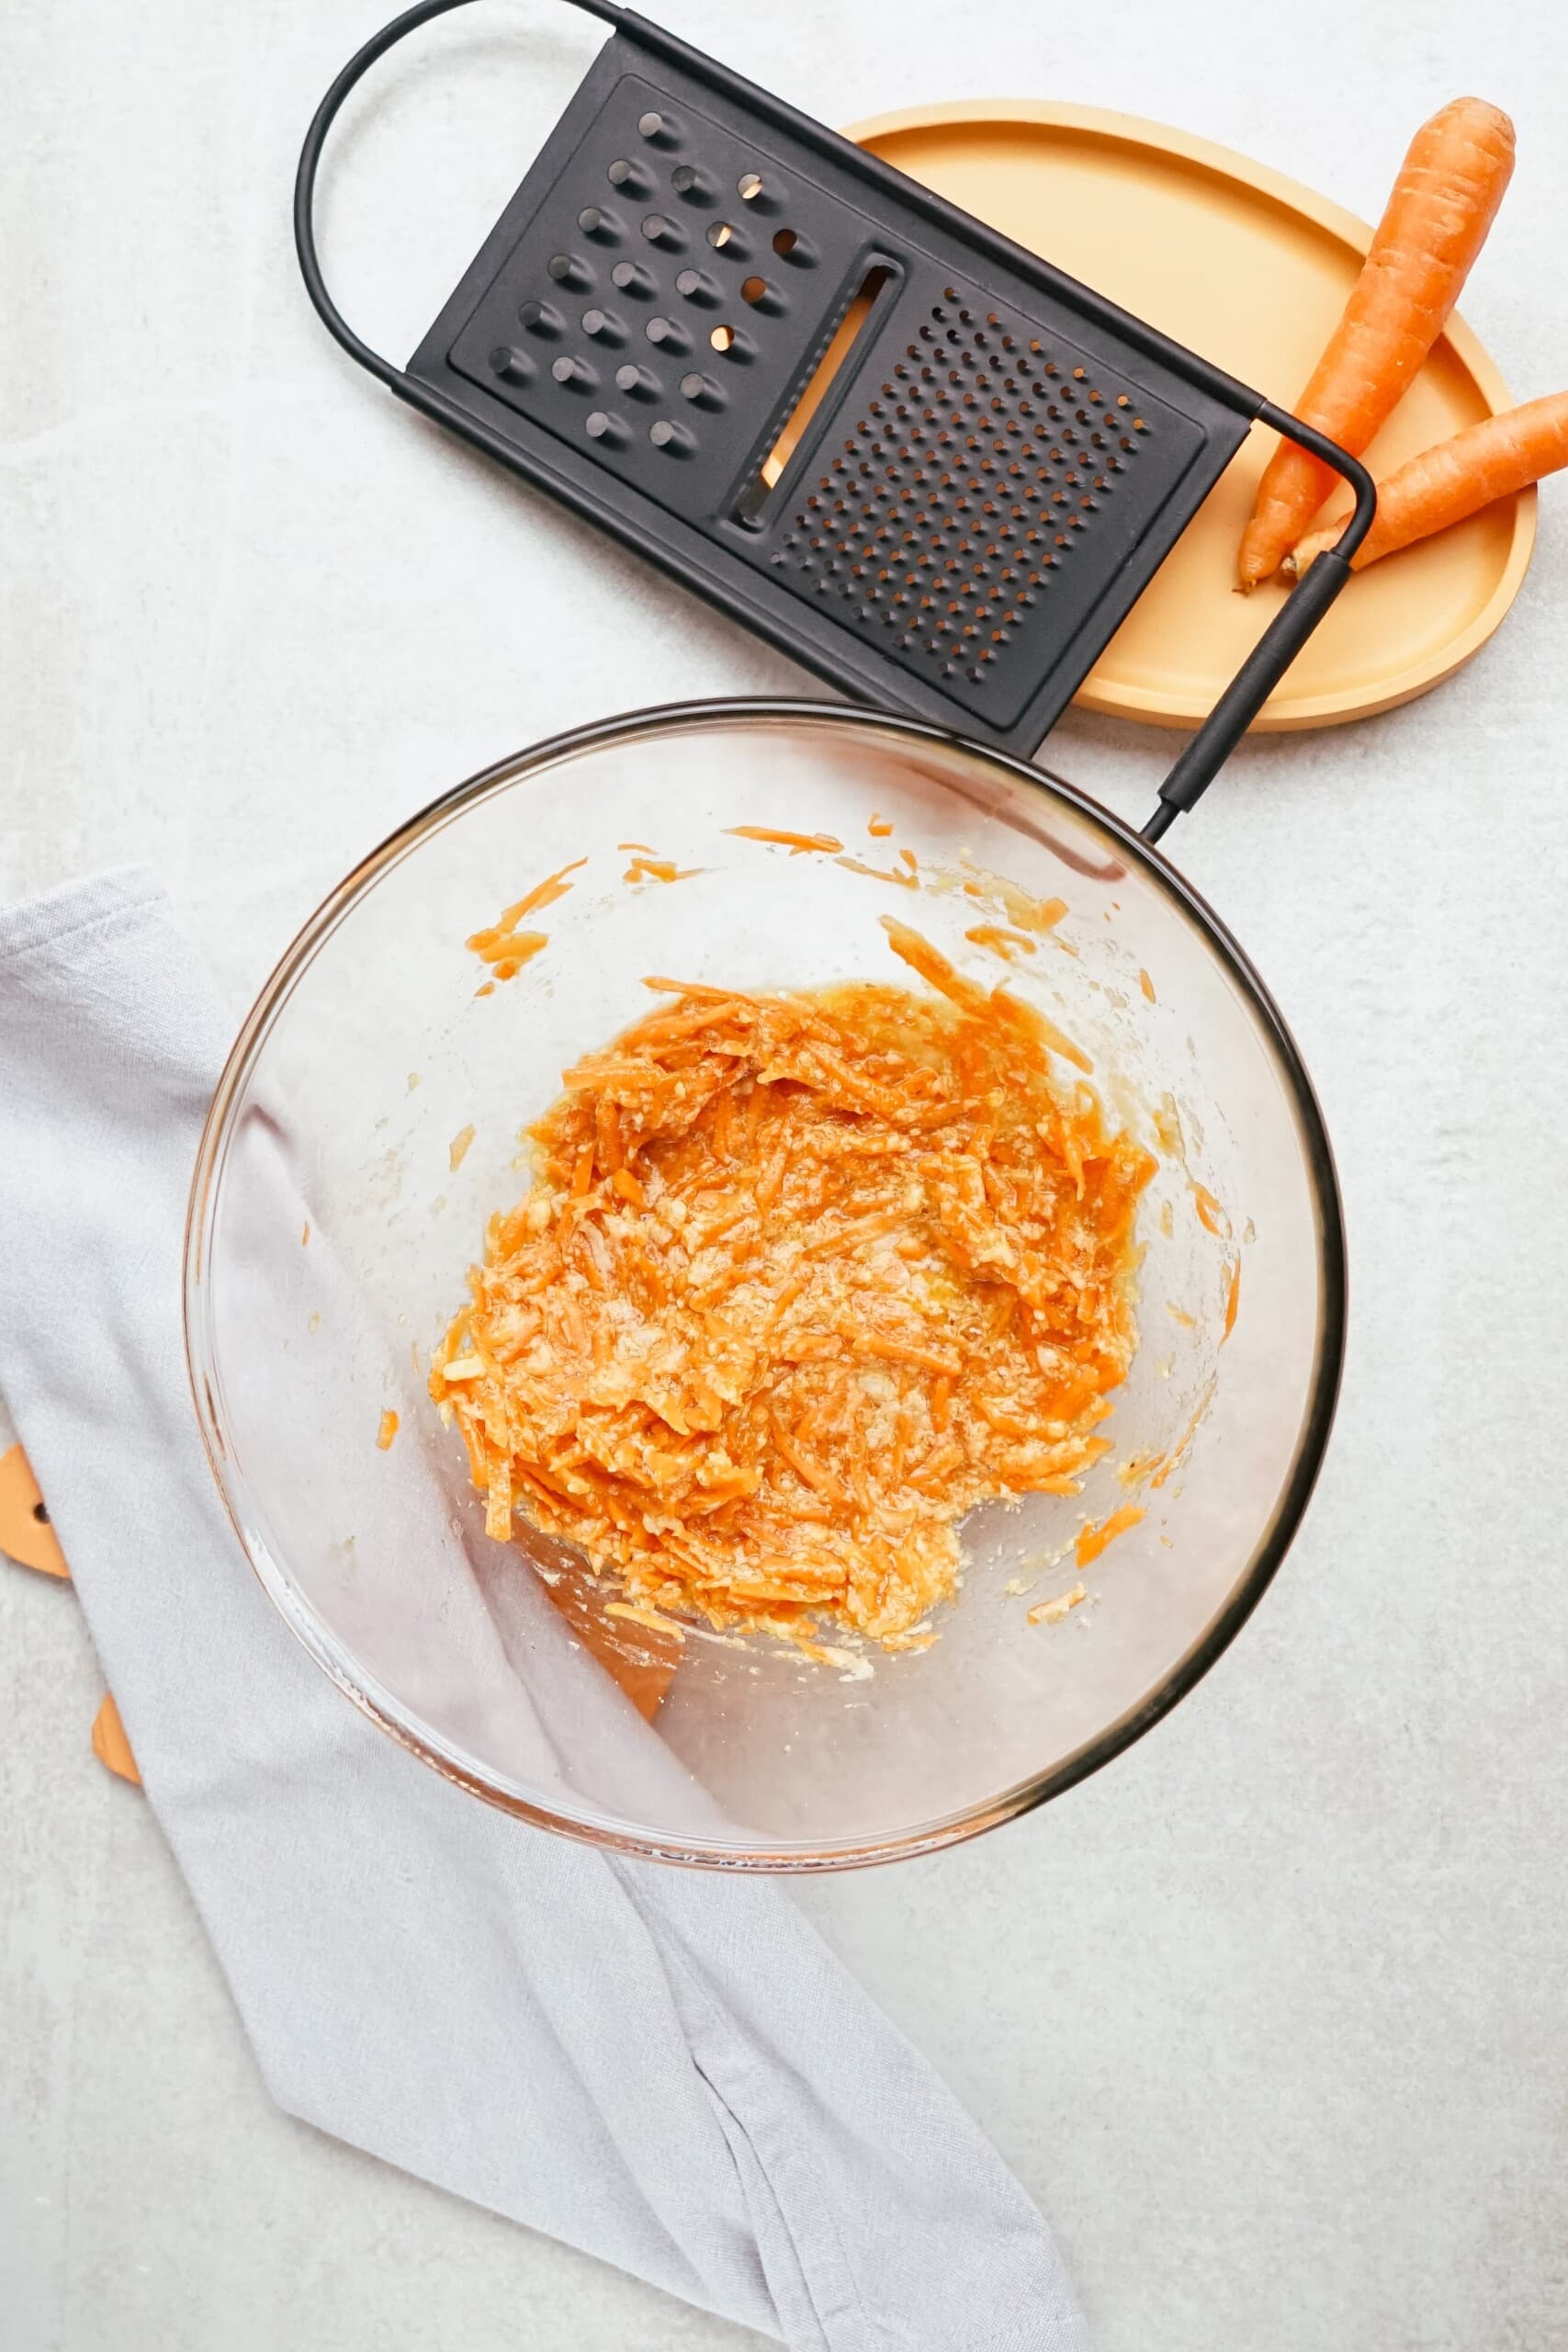 shredded carrots added to sugar mixture